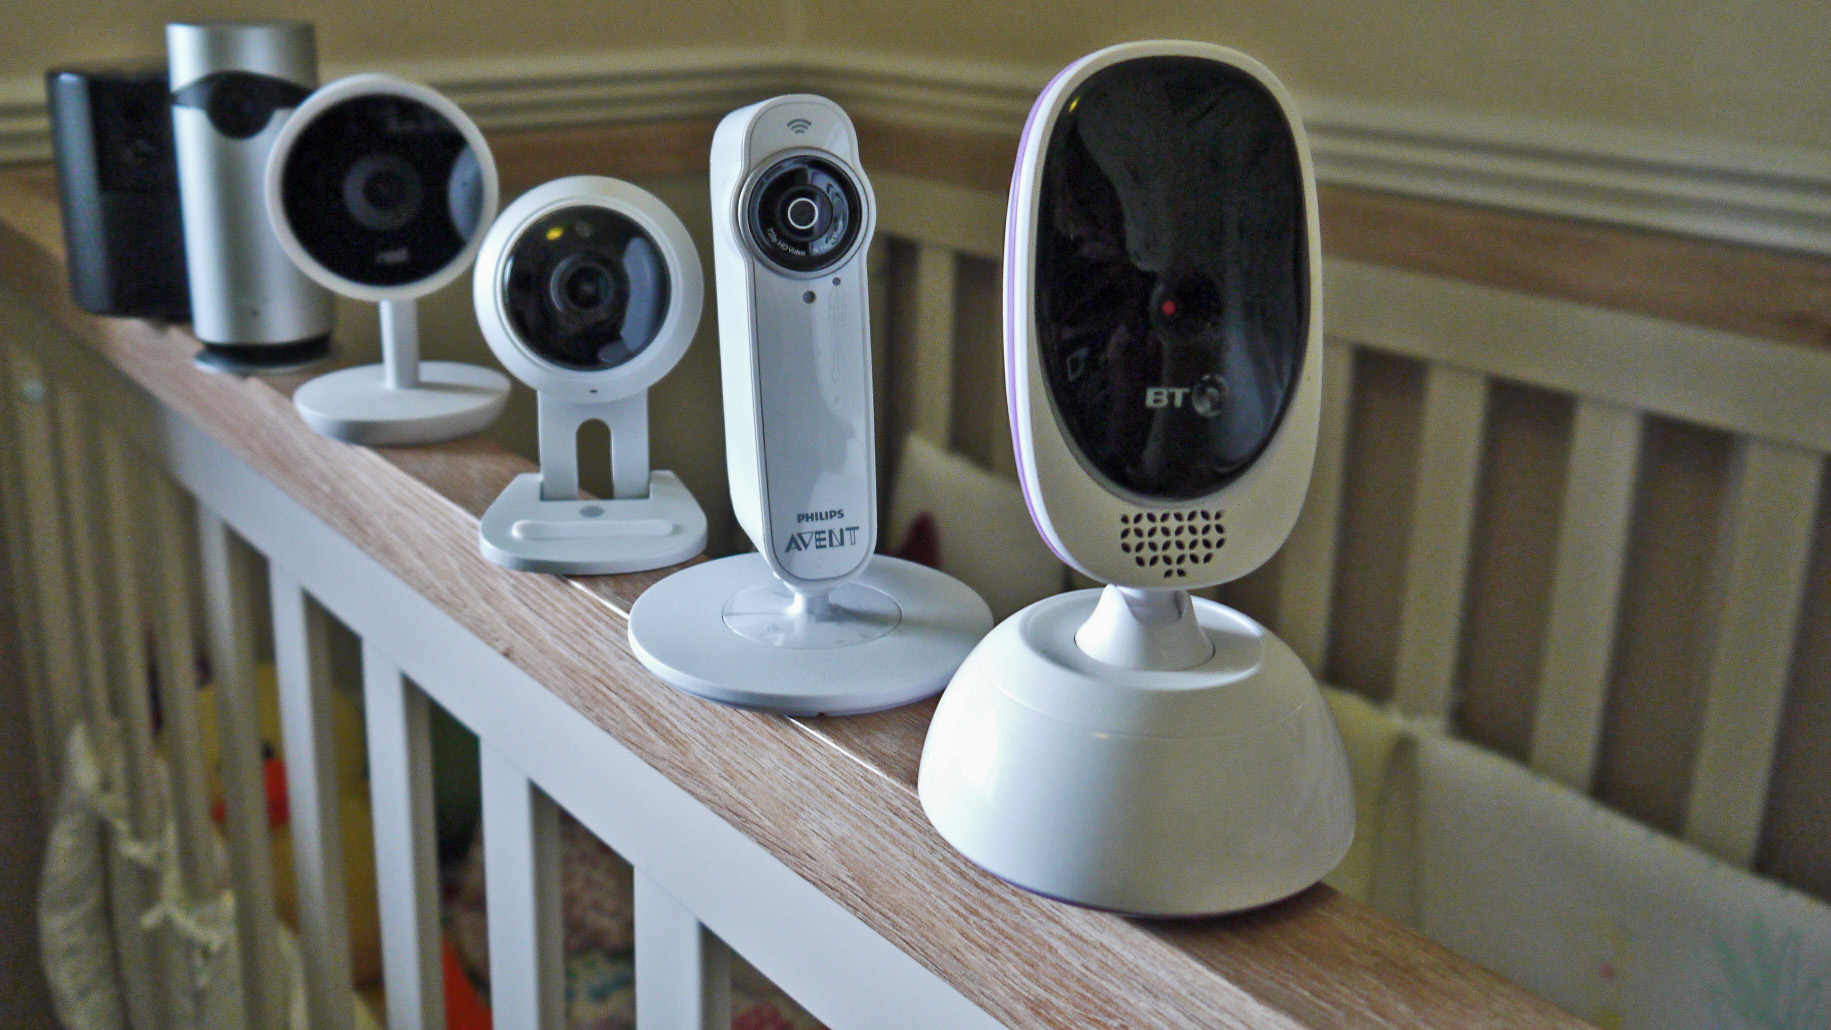 The Best Baby Monitors of 2019